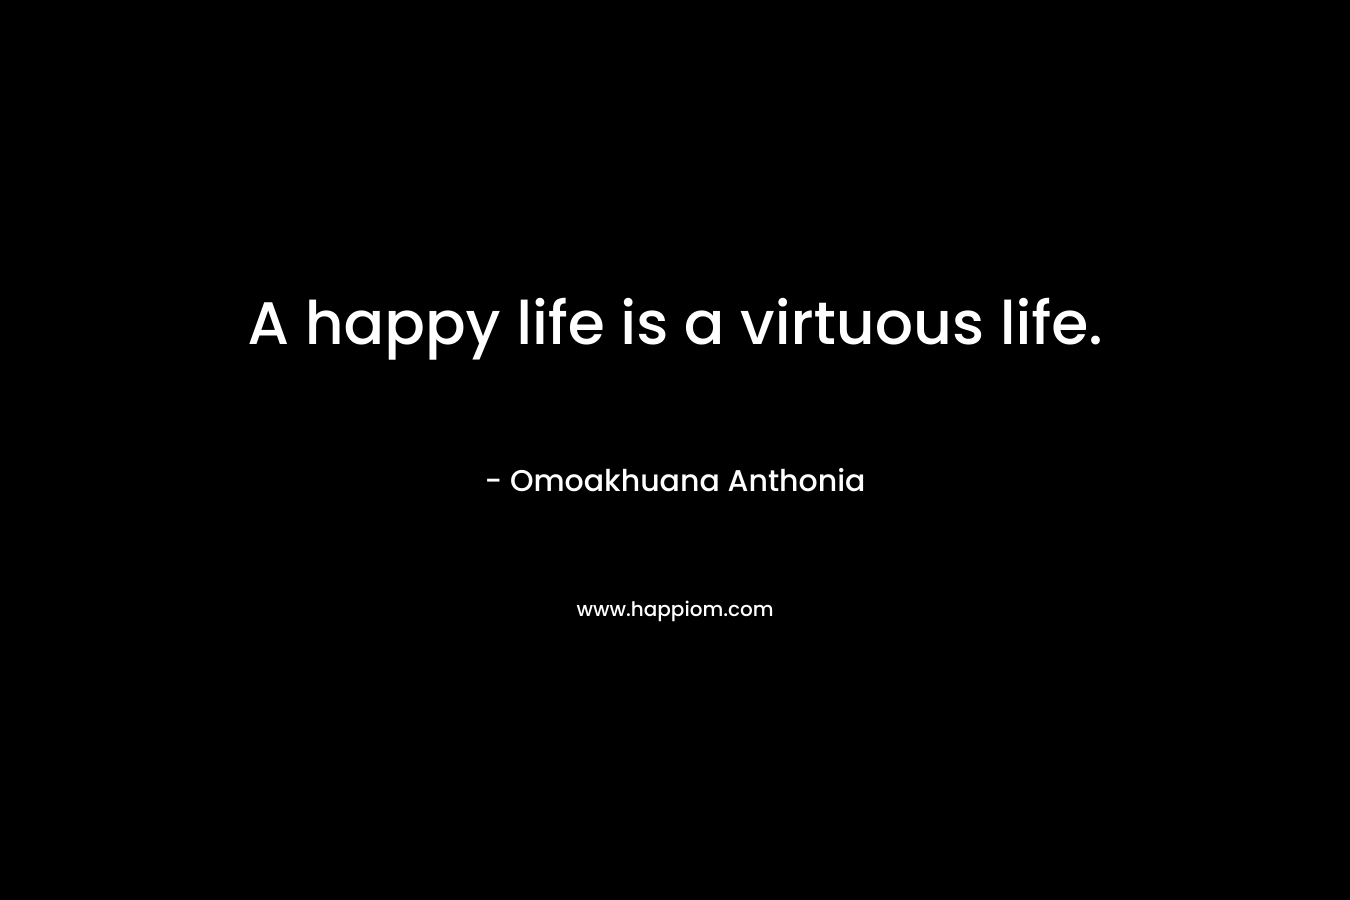 A happy life is a virtuous life. – Omoakhuana Anthonia